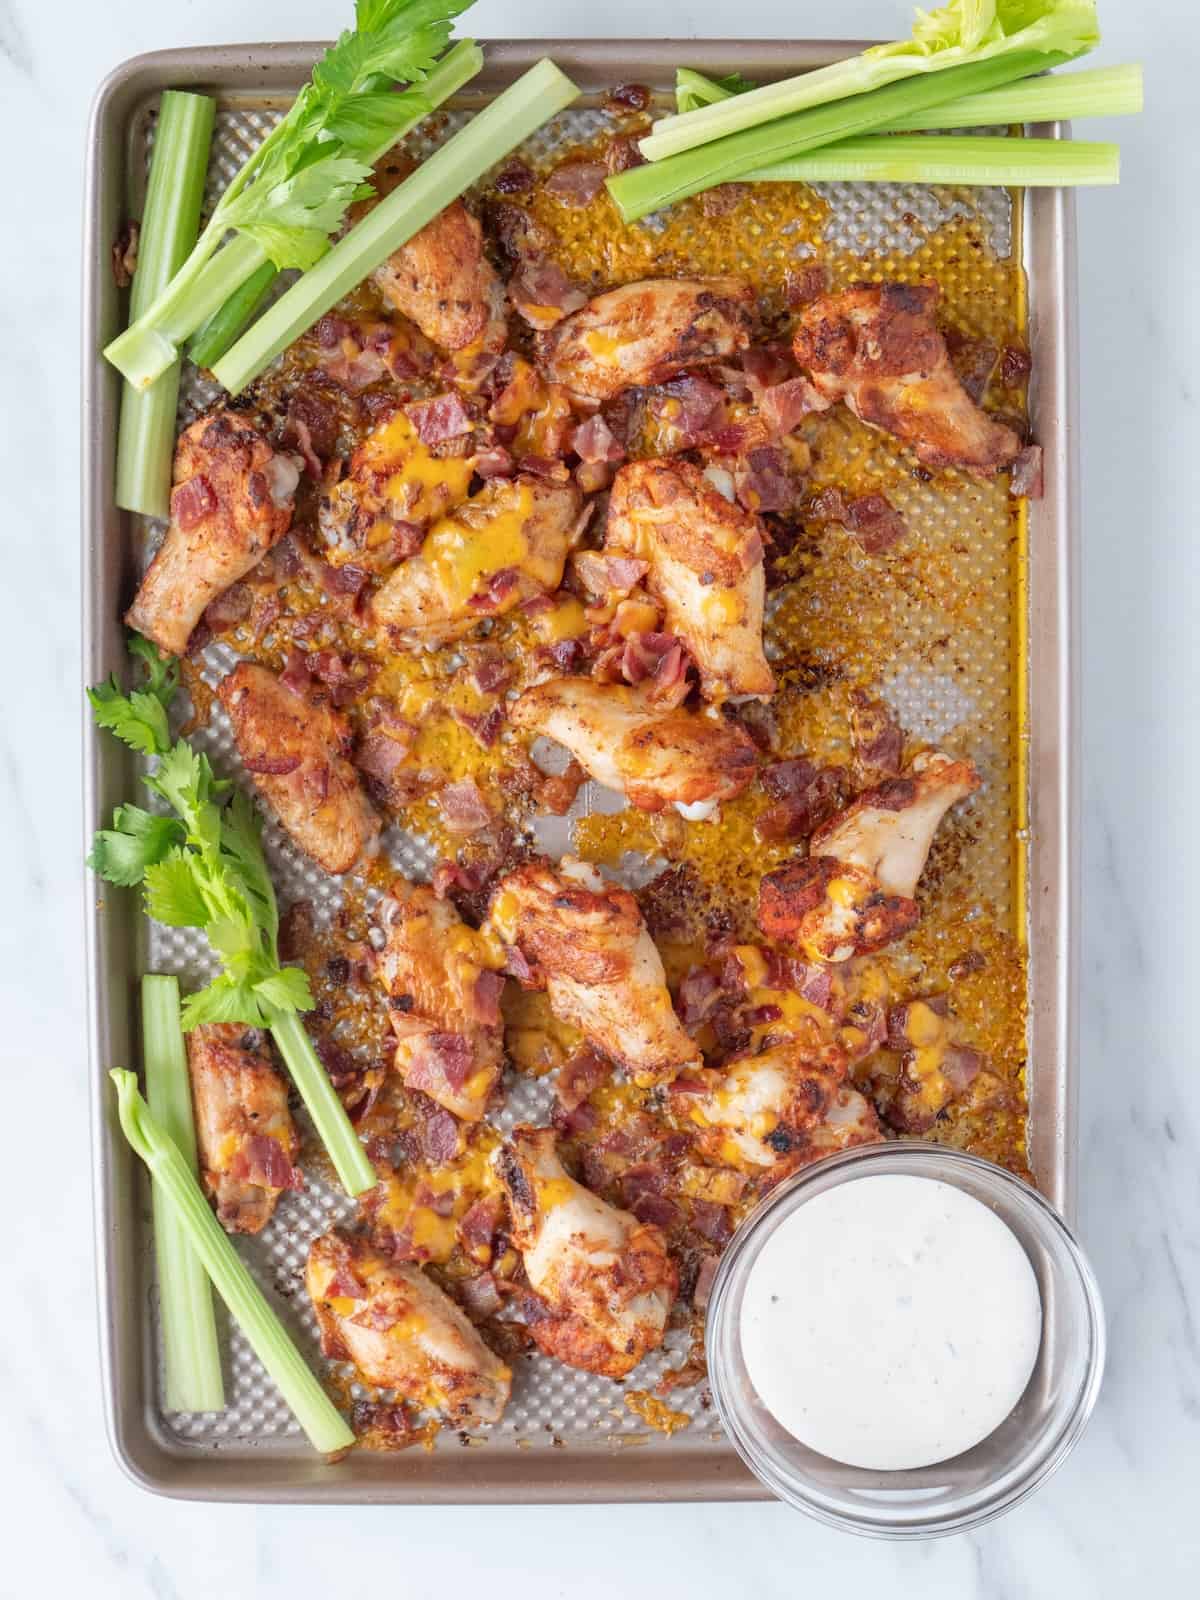 A baking sheet with chicken wings topped with bacon pieces and melted cheese, fresh out of the oven, along with celery sticks and a little glass bowl of ranch in the corner.